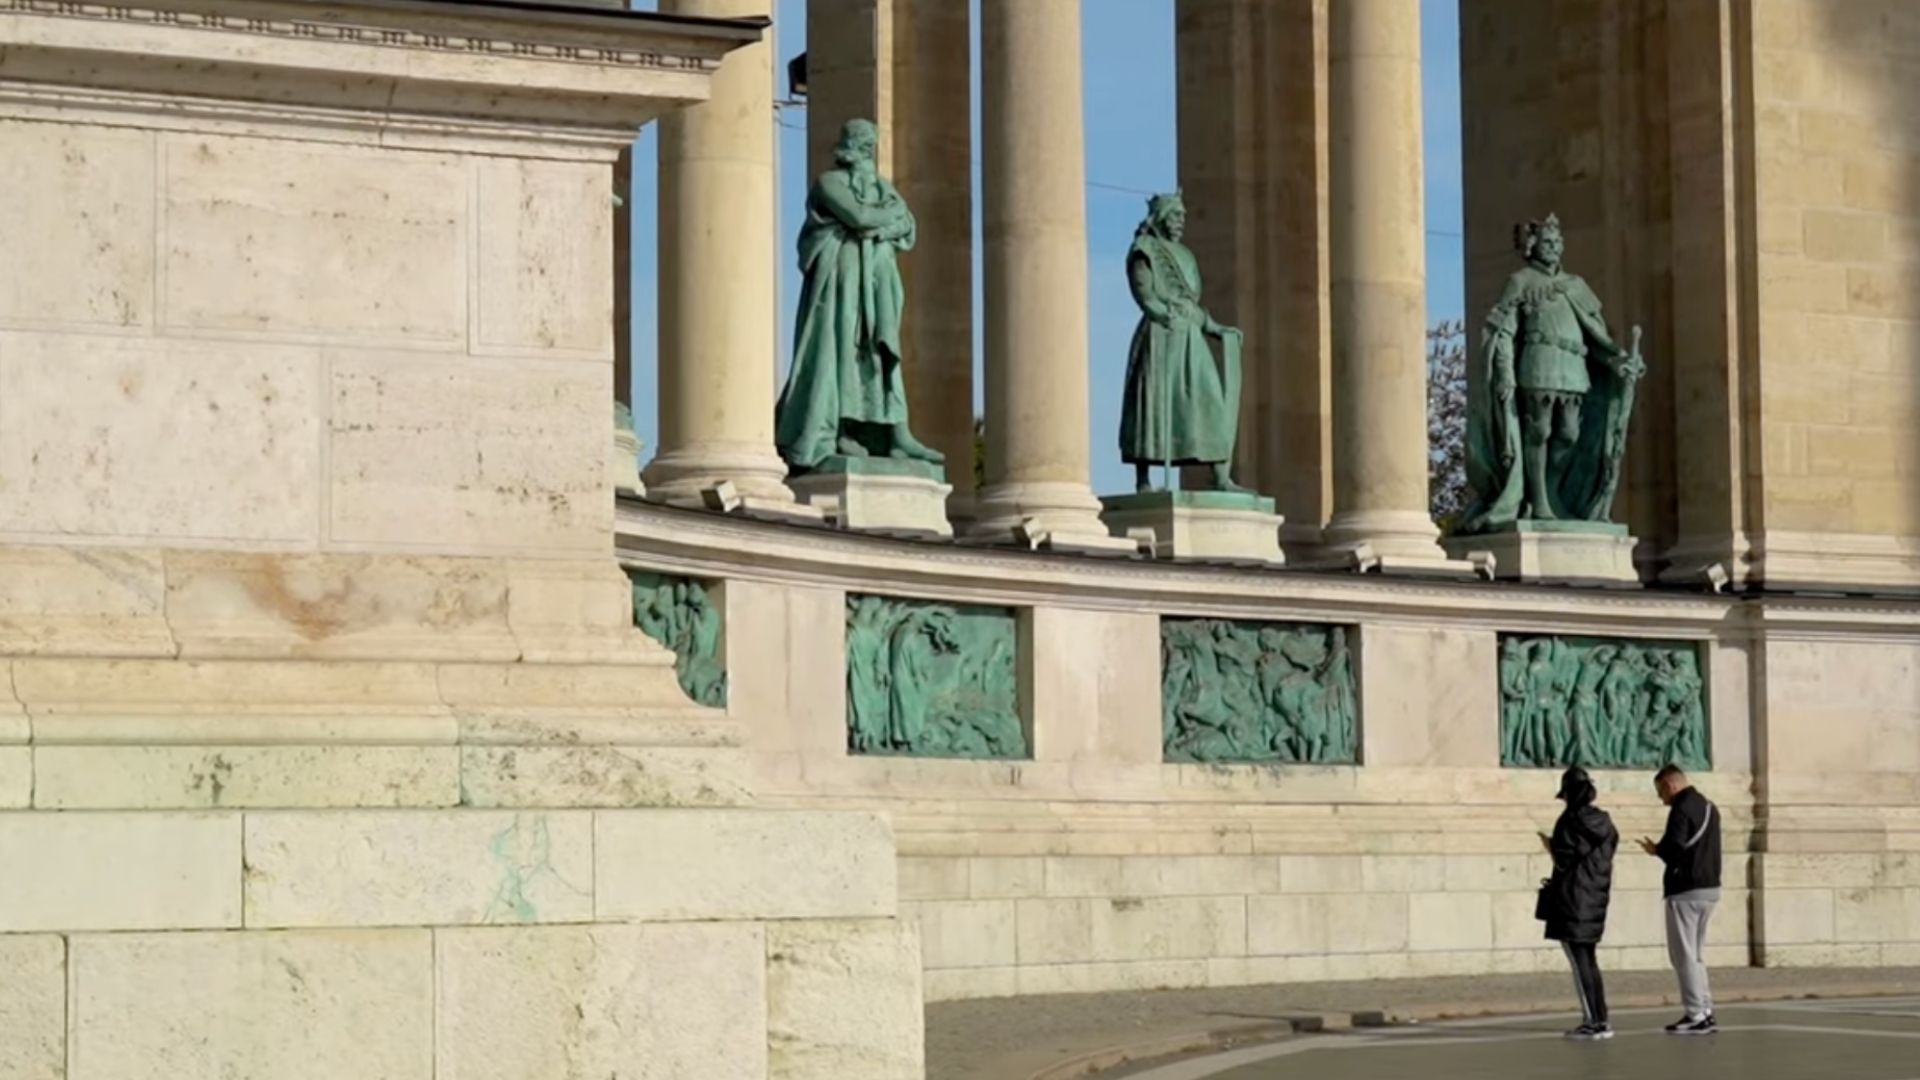 Statues of notable Hungarian leaders in the colonnade at Heroes' Square in Budapest, Hungary.